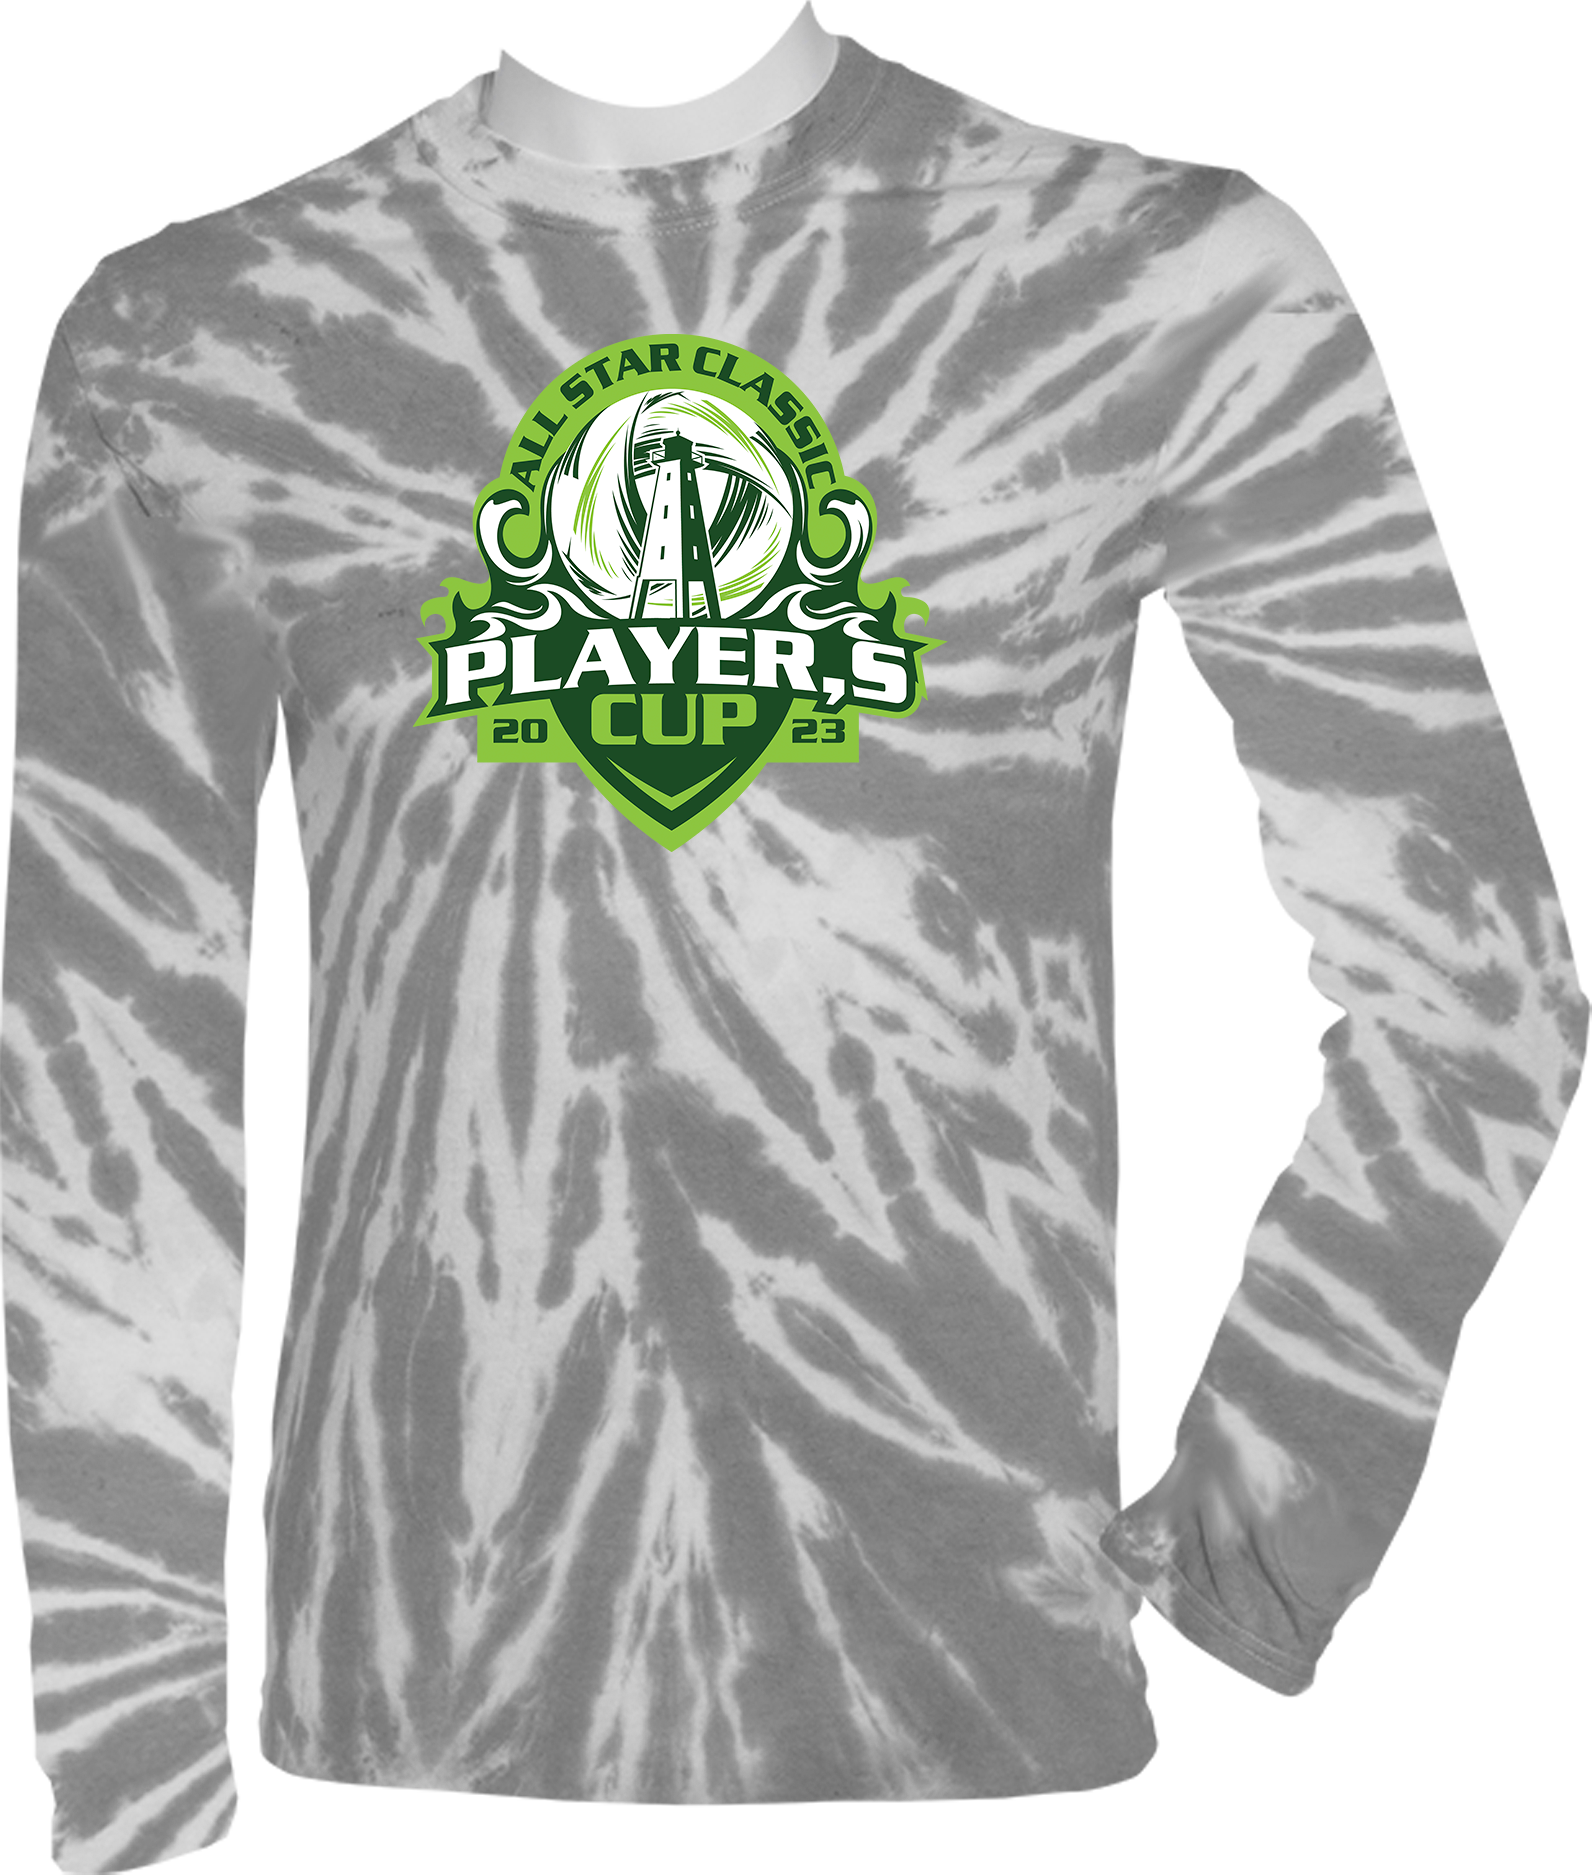 TIE-DYE LONG SLEEVES - 2023 Players Cup All Star Classic